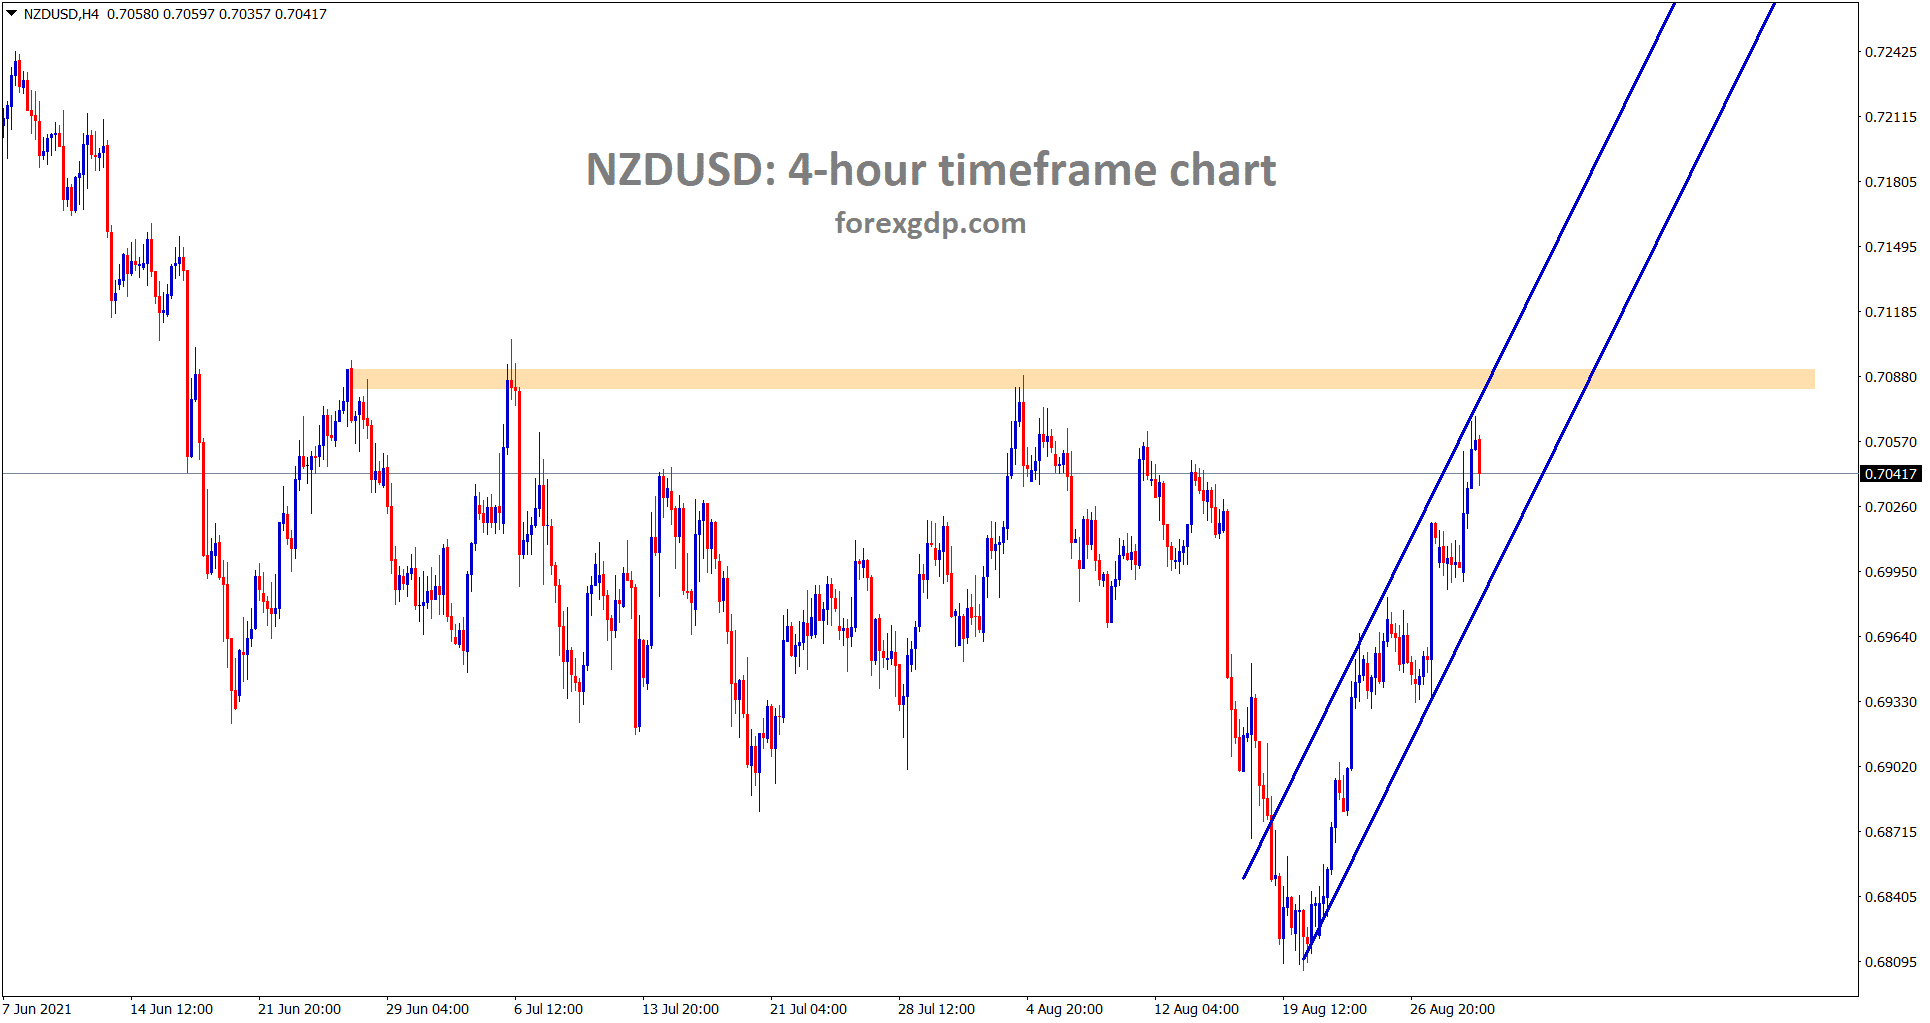 NZDUSD is moving in a minor uptrend line and its near to the major resistance area